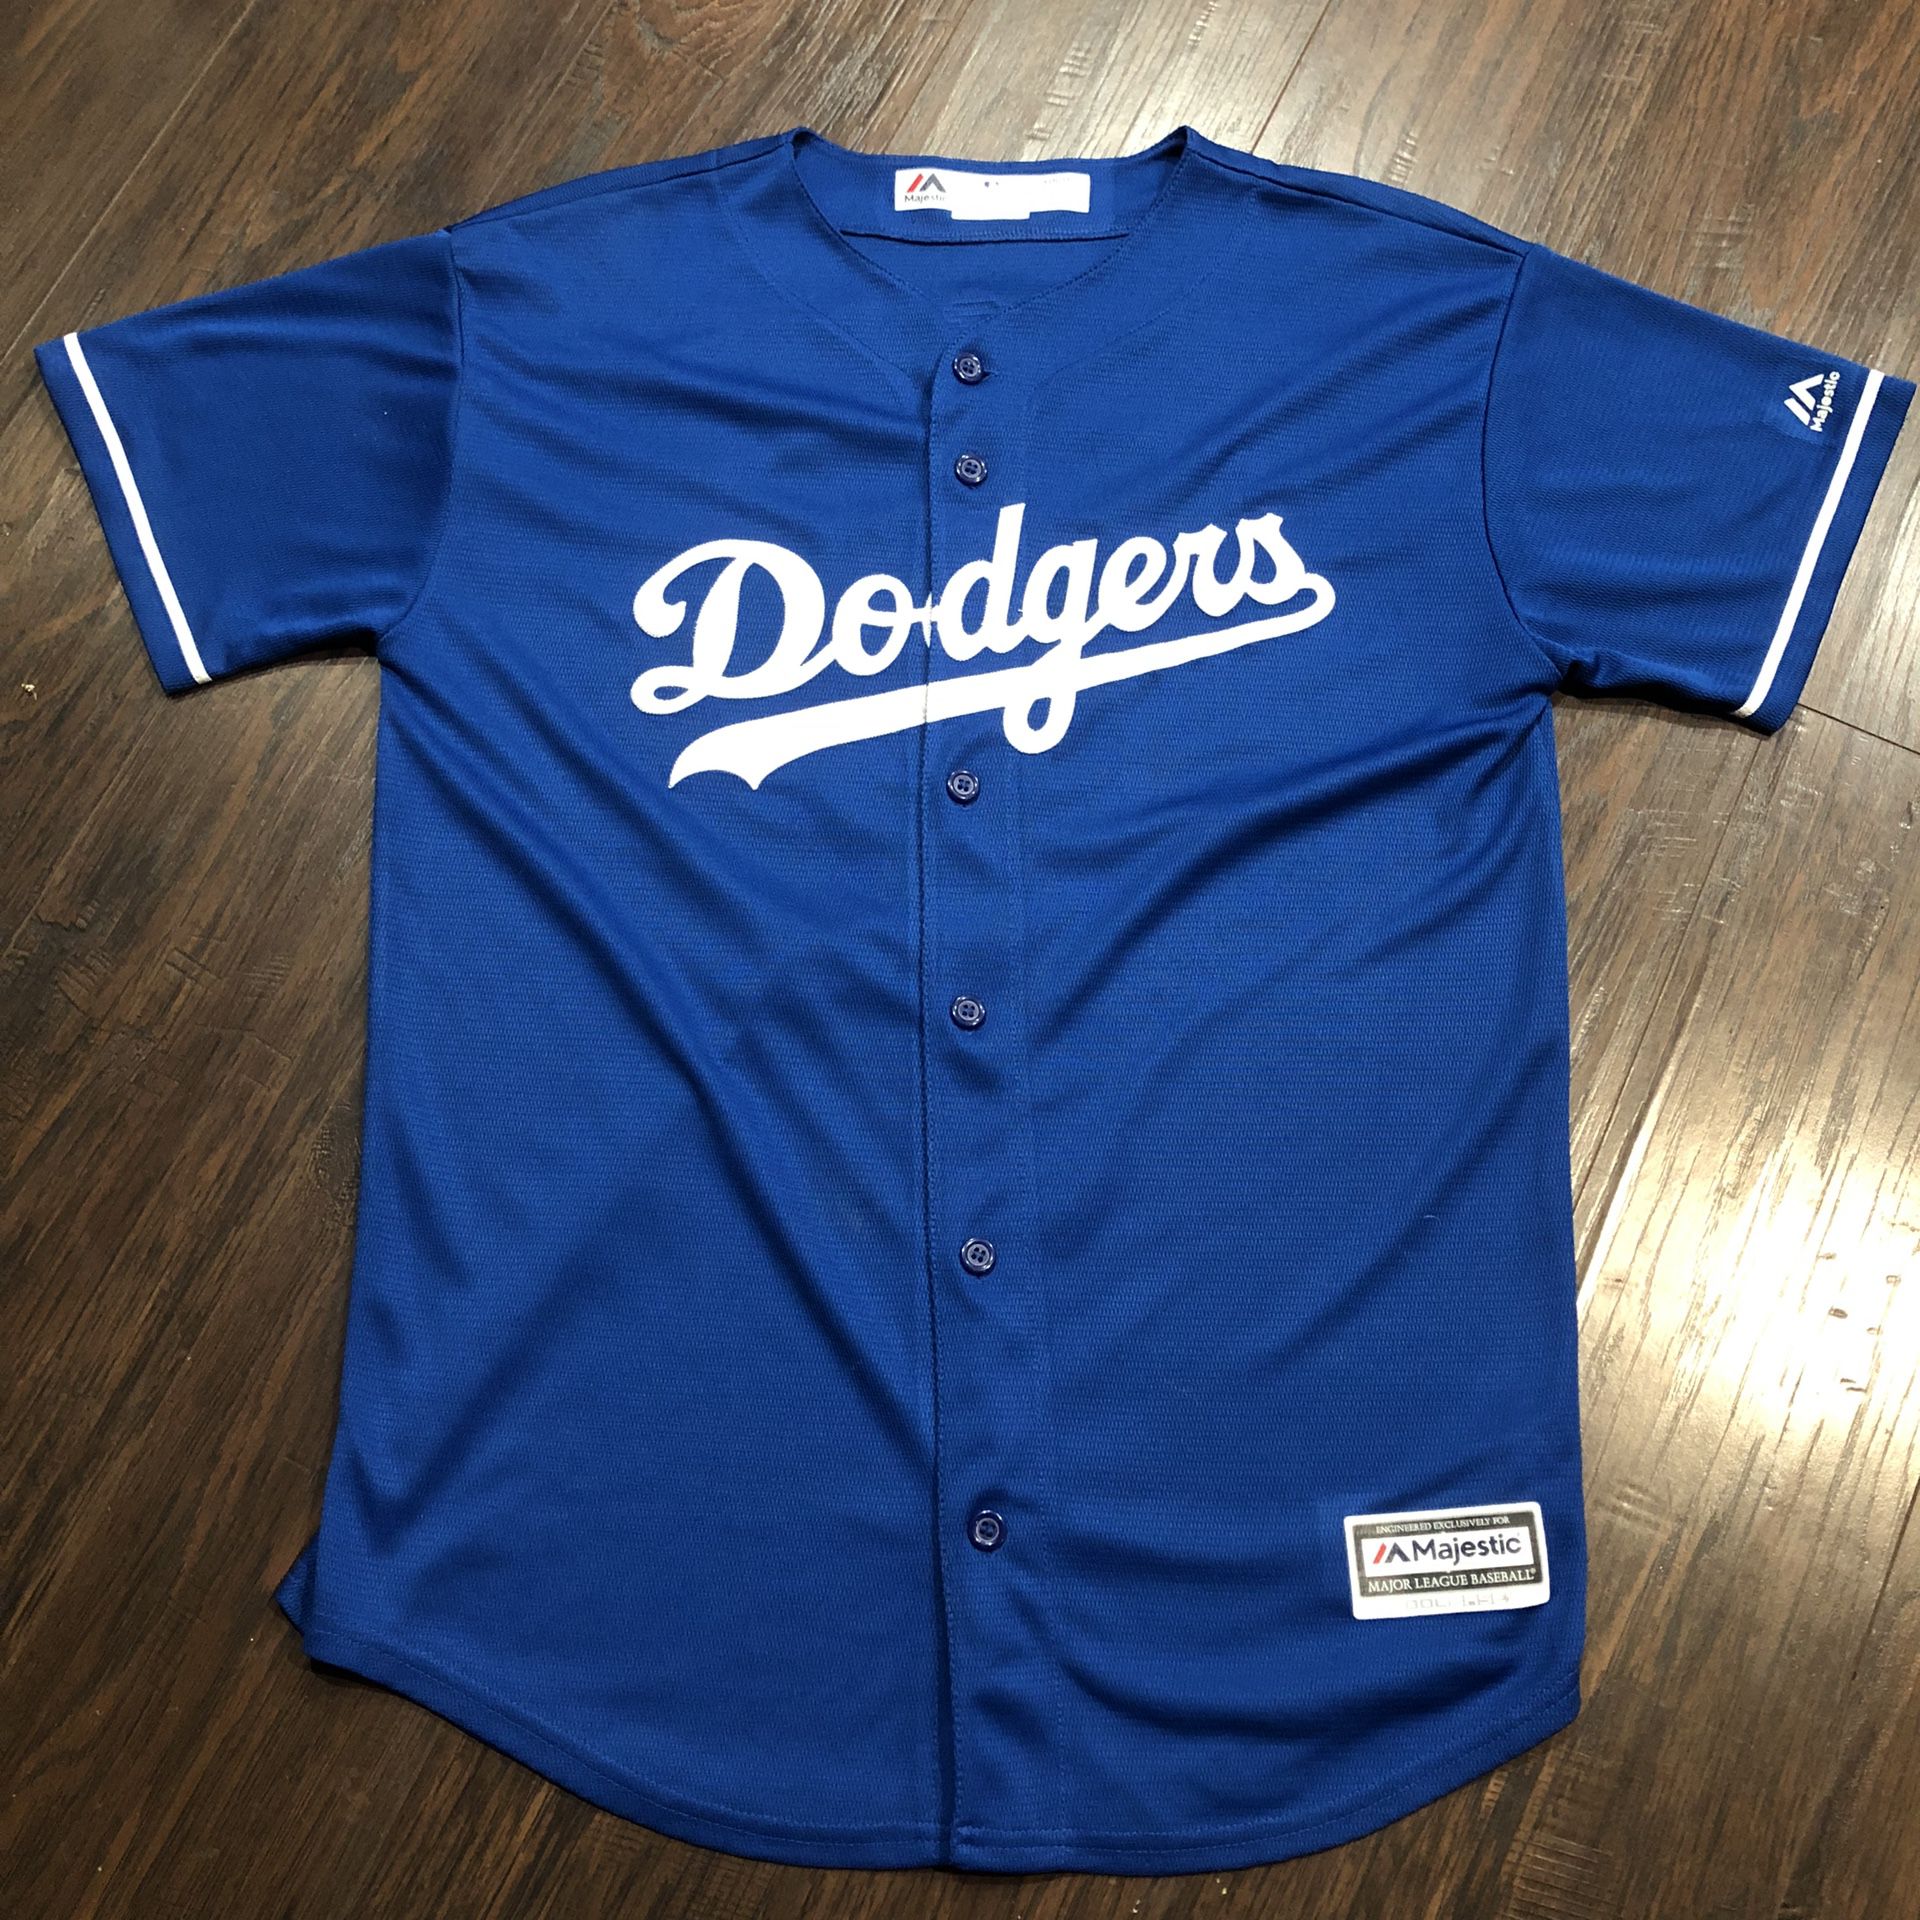 youth xl dodgers jersey